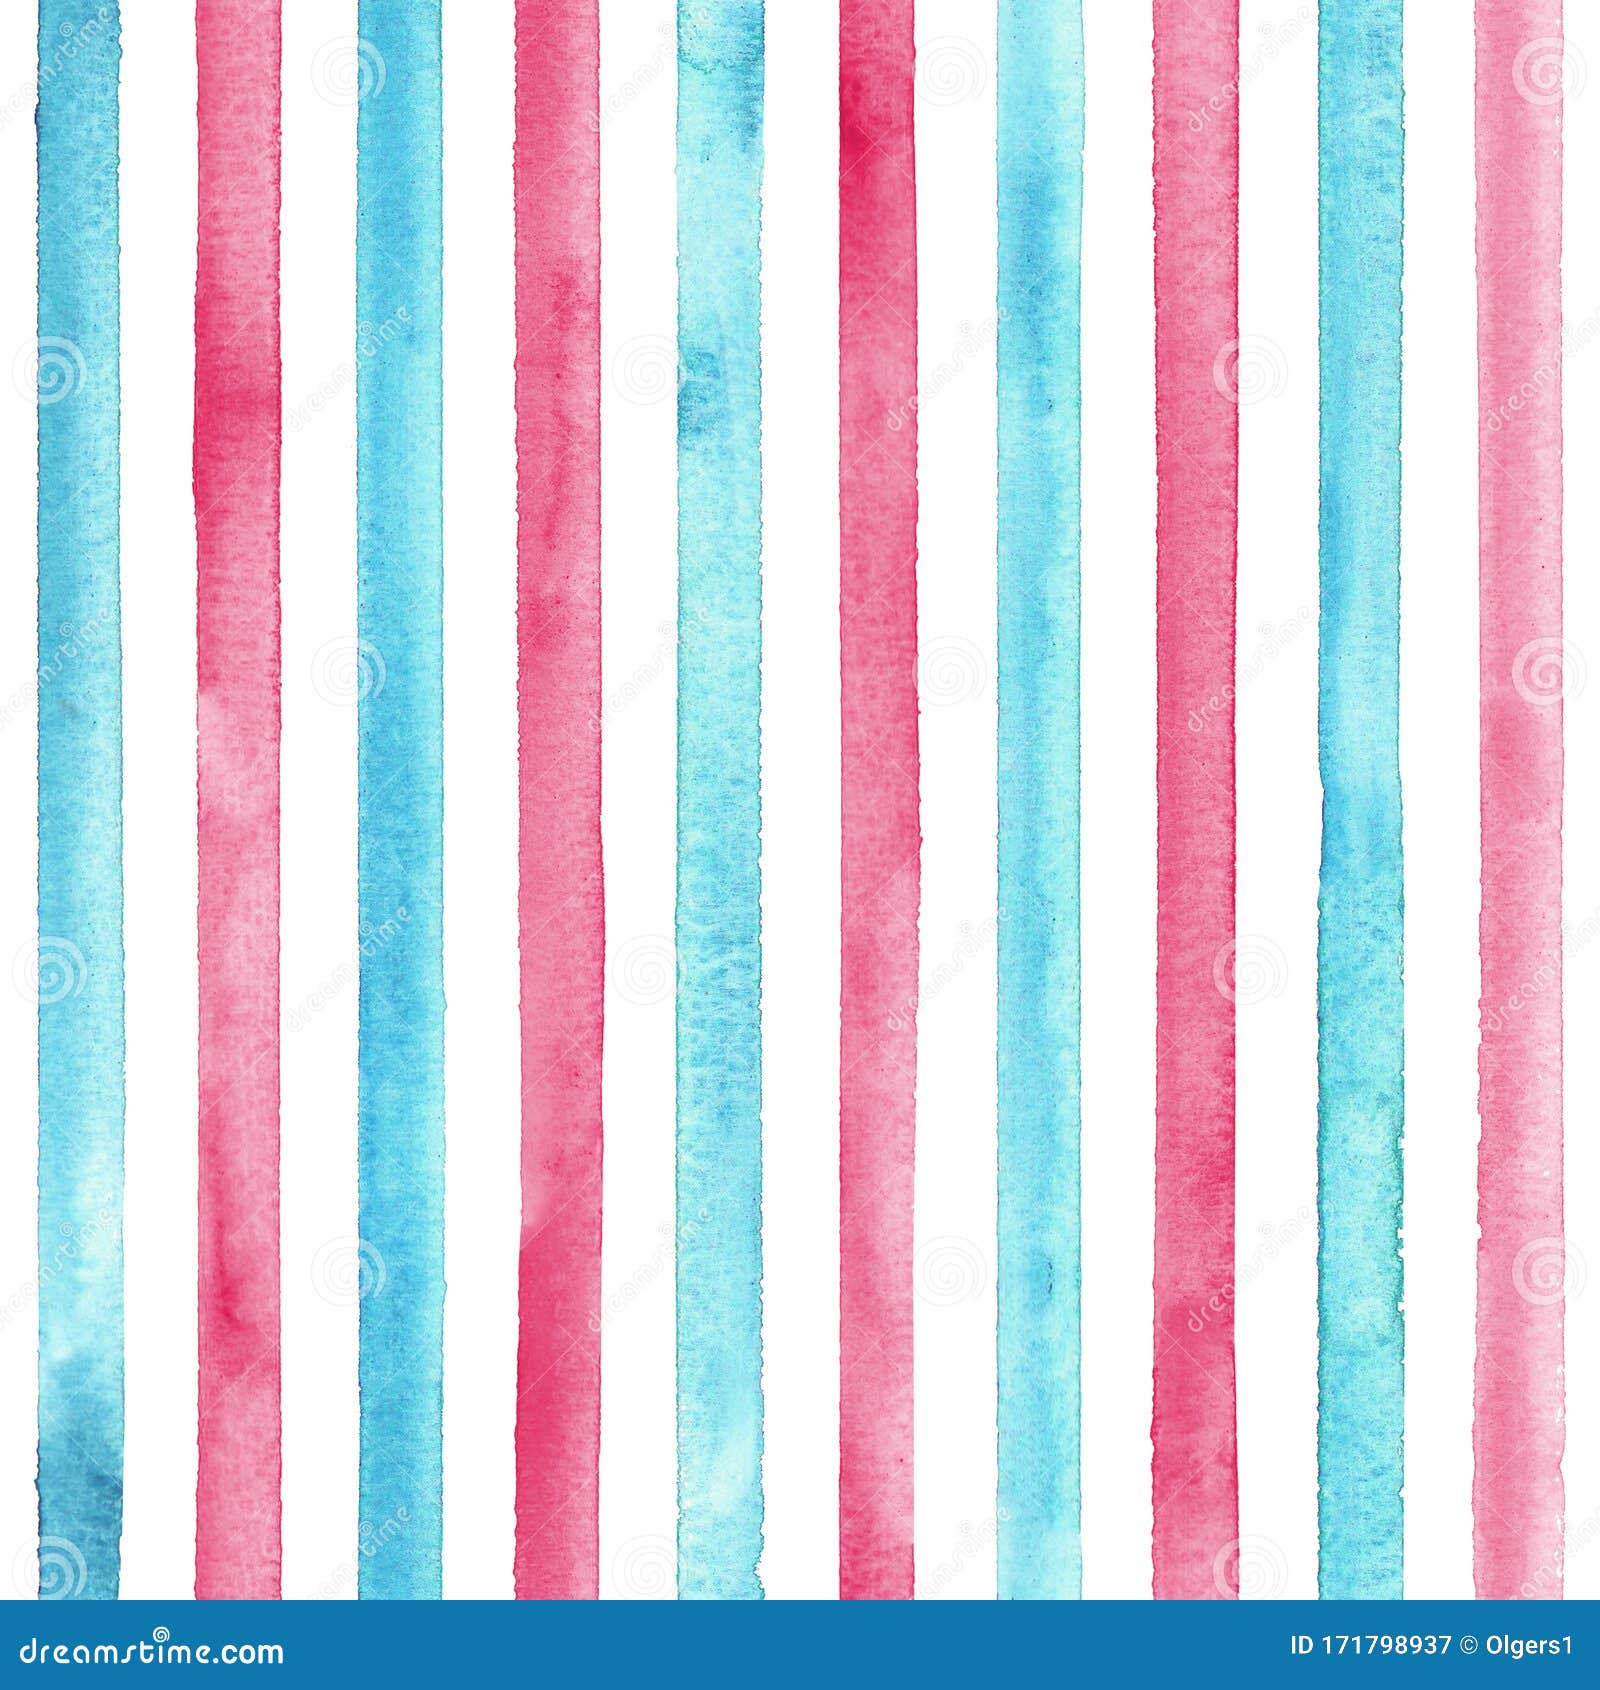 Watercolor Teal Blue Pink Stripes on White Background. Colorful Striped  Seamless Pattern Stock Illustration - Illustration of fashion, gradient:  171798937